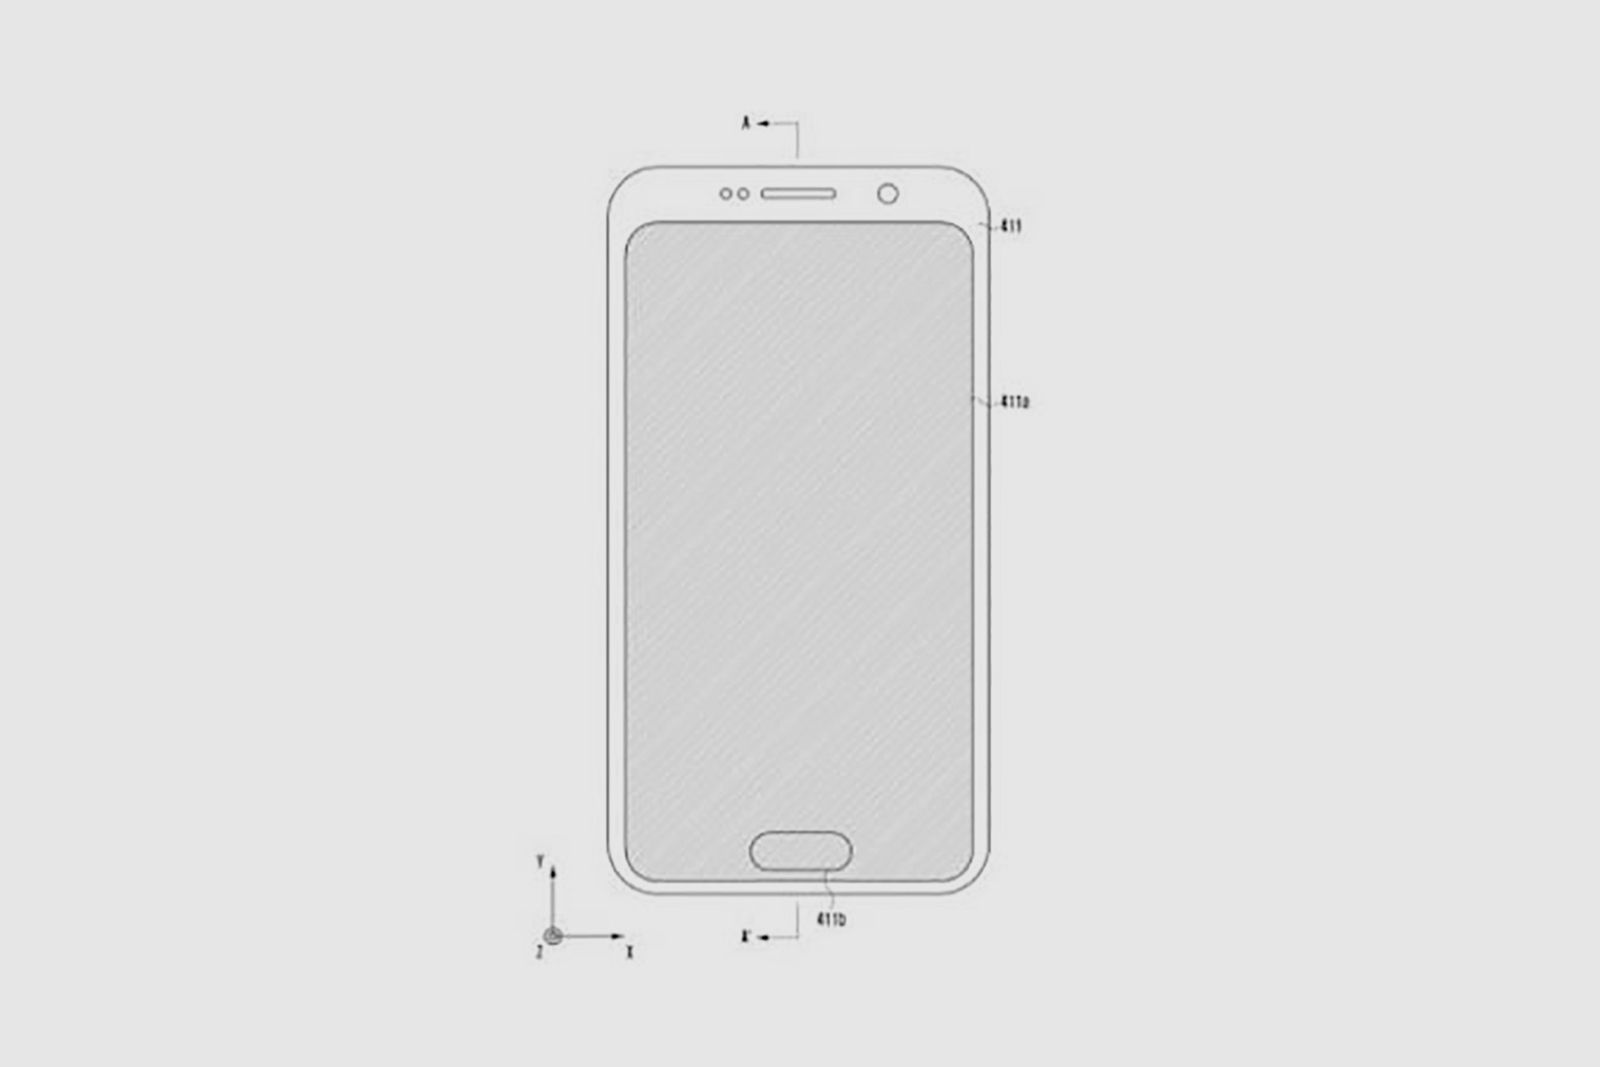 Samsung patent shows in-display fingerprint scanner likely for Note 9 image 1